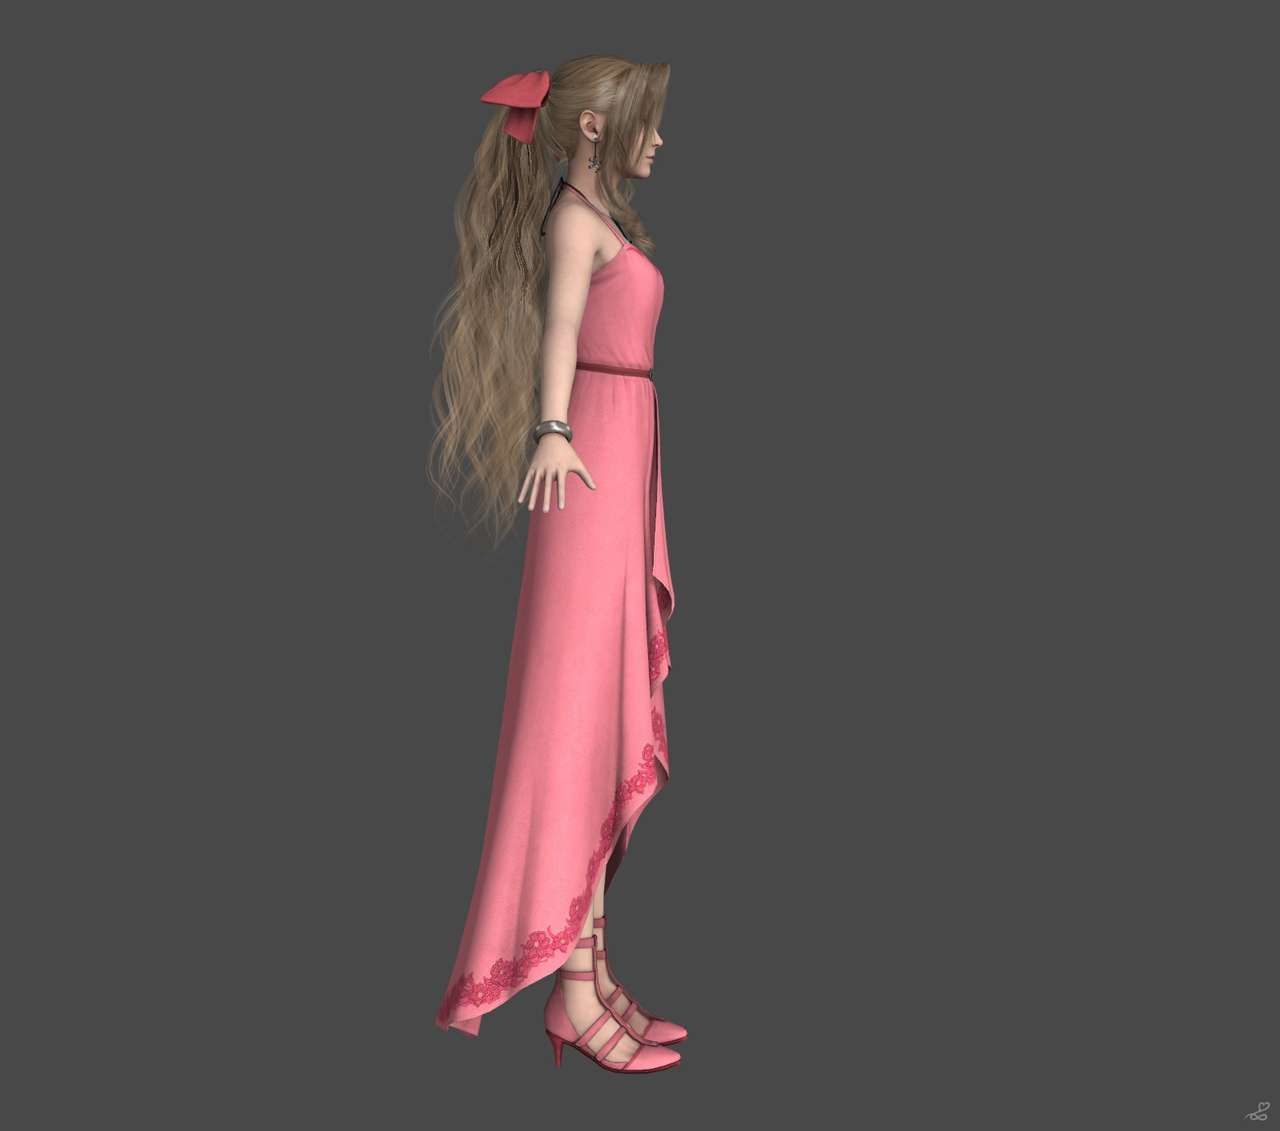 [J.A.] FF7 Remake | Aerith Reference 4